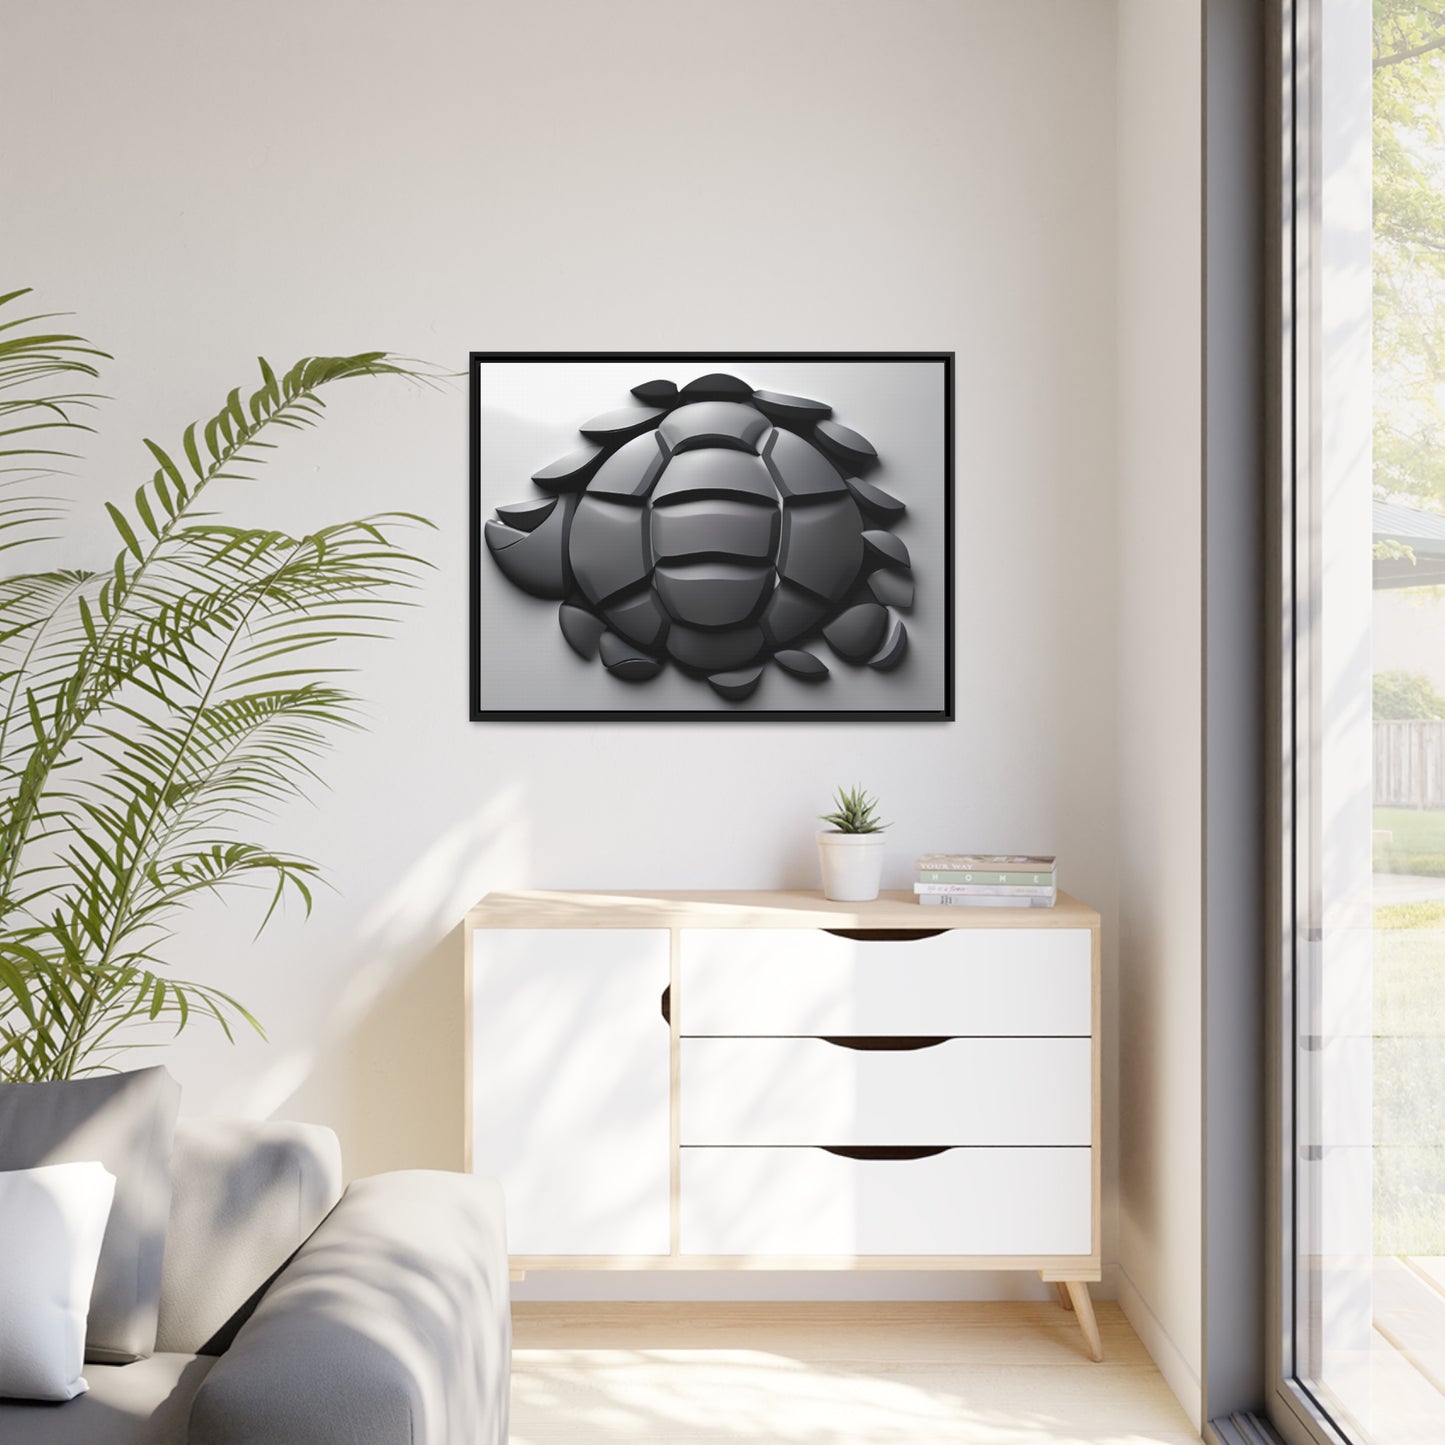 Home Decor - Matte Canvas Wall Art, Black Frame - Turtleback - Fathers Day Gift Item Special